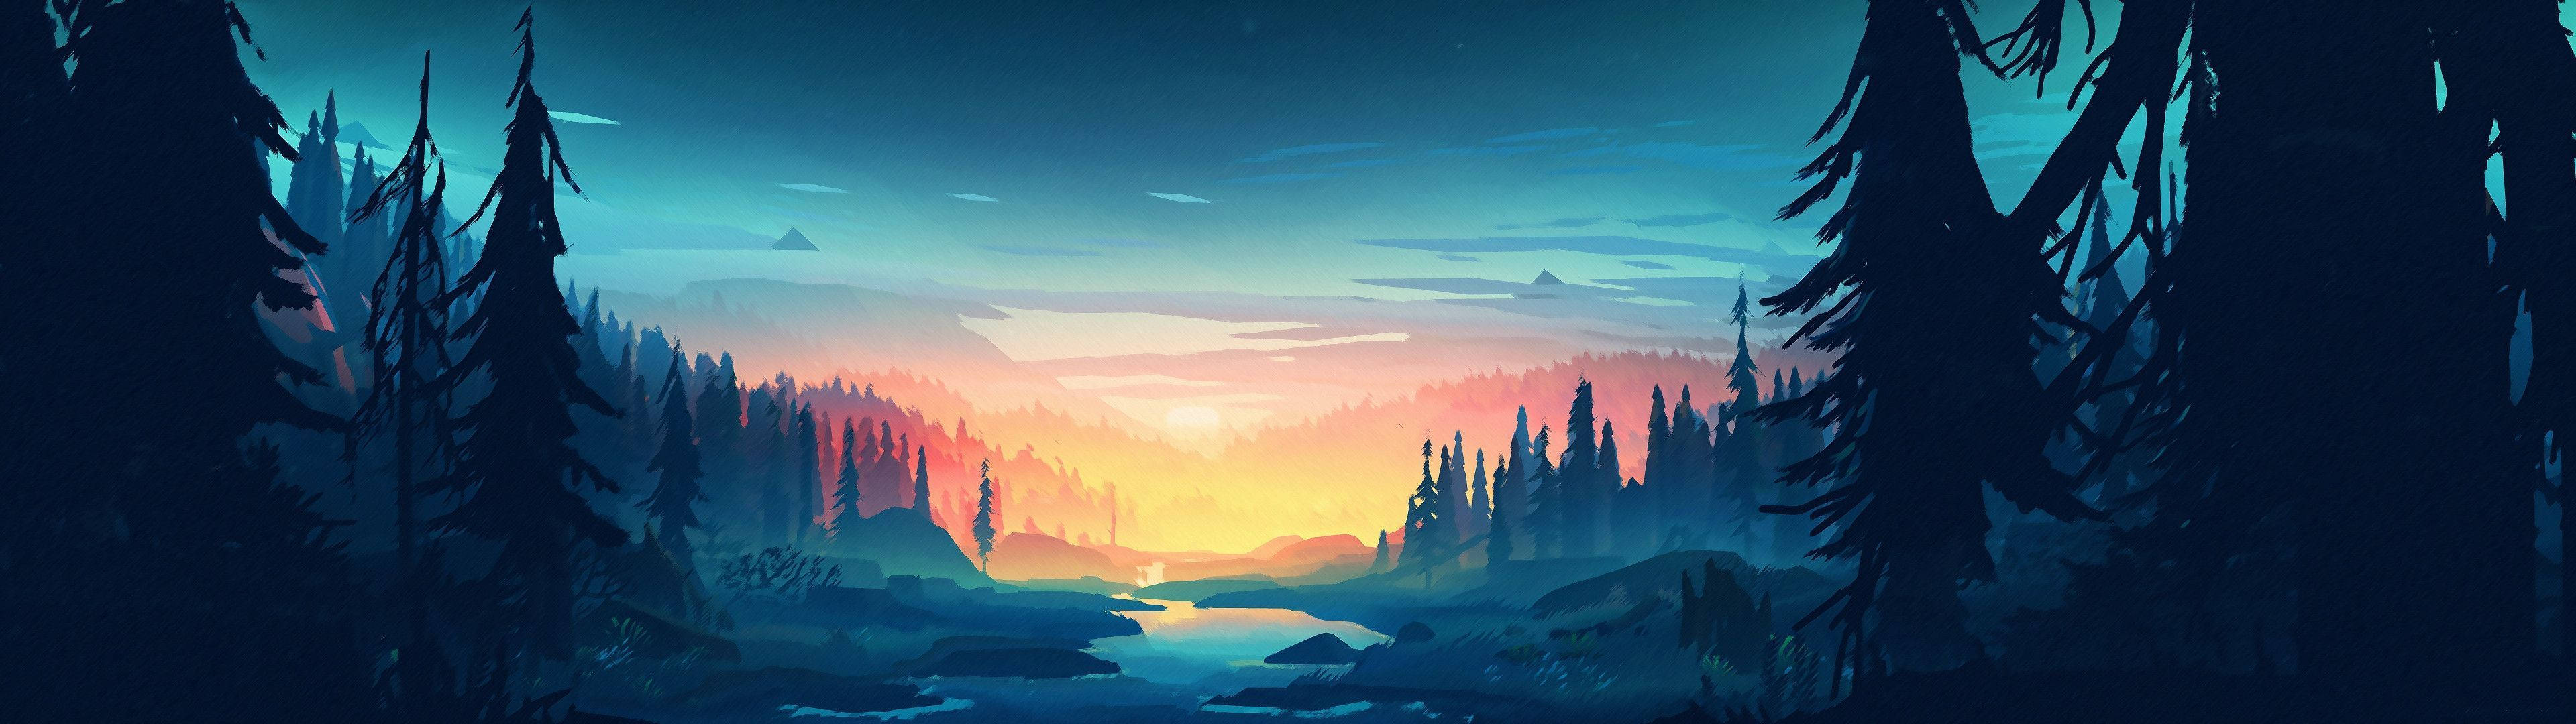 4k Dual Monitor Art Of Forest At Sunset Wallpaper